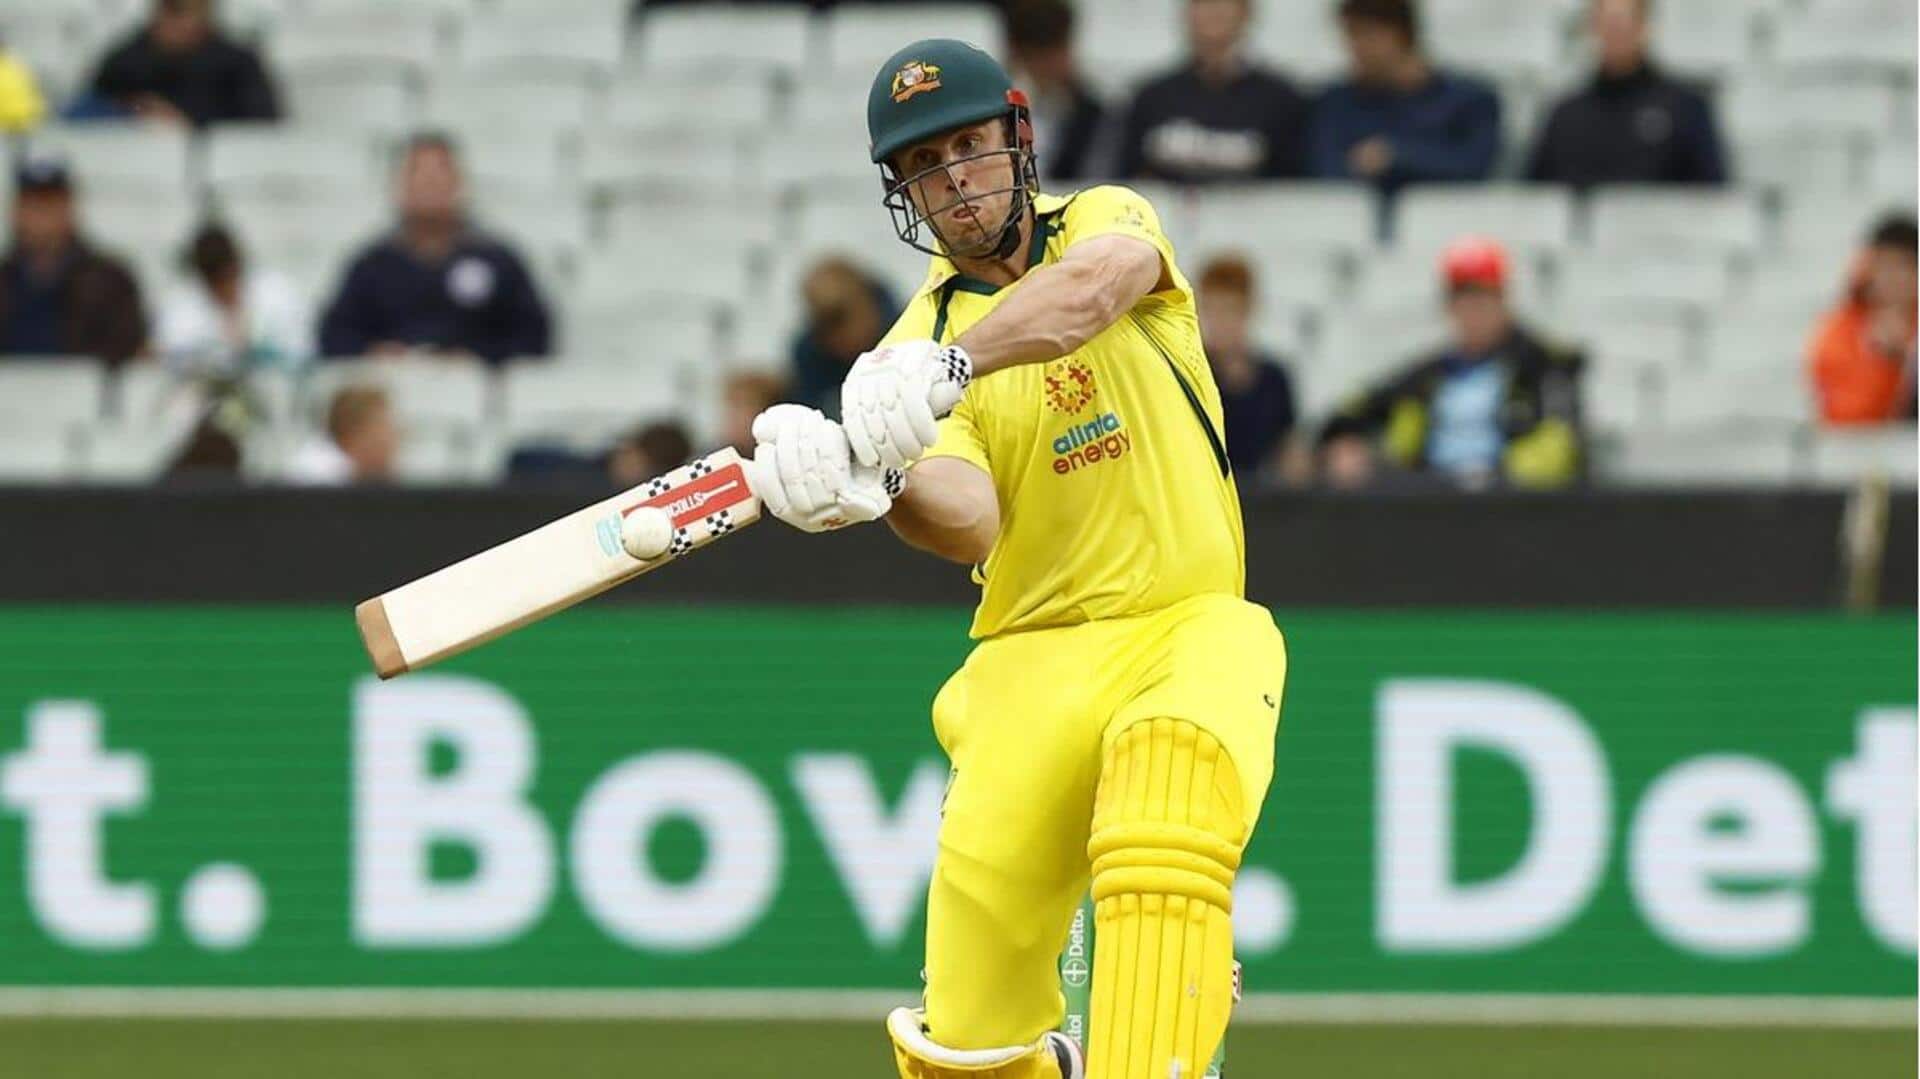 Mitchell Marsh hammers his second century in 2023 World Cup